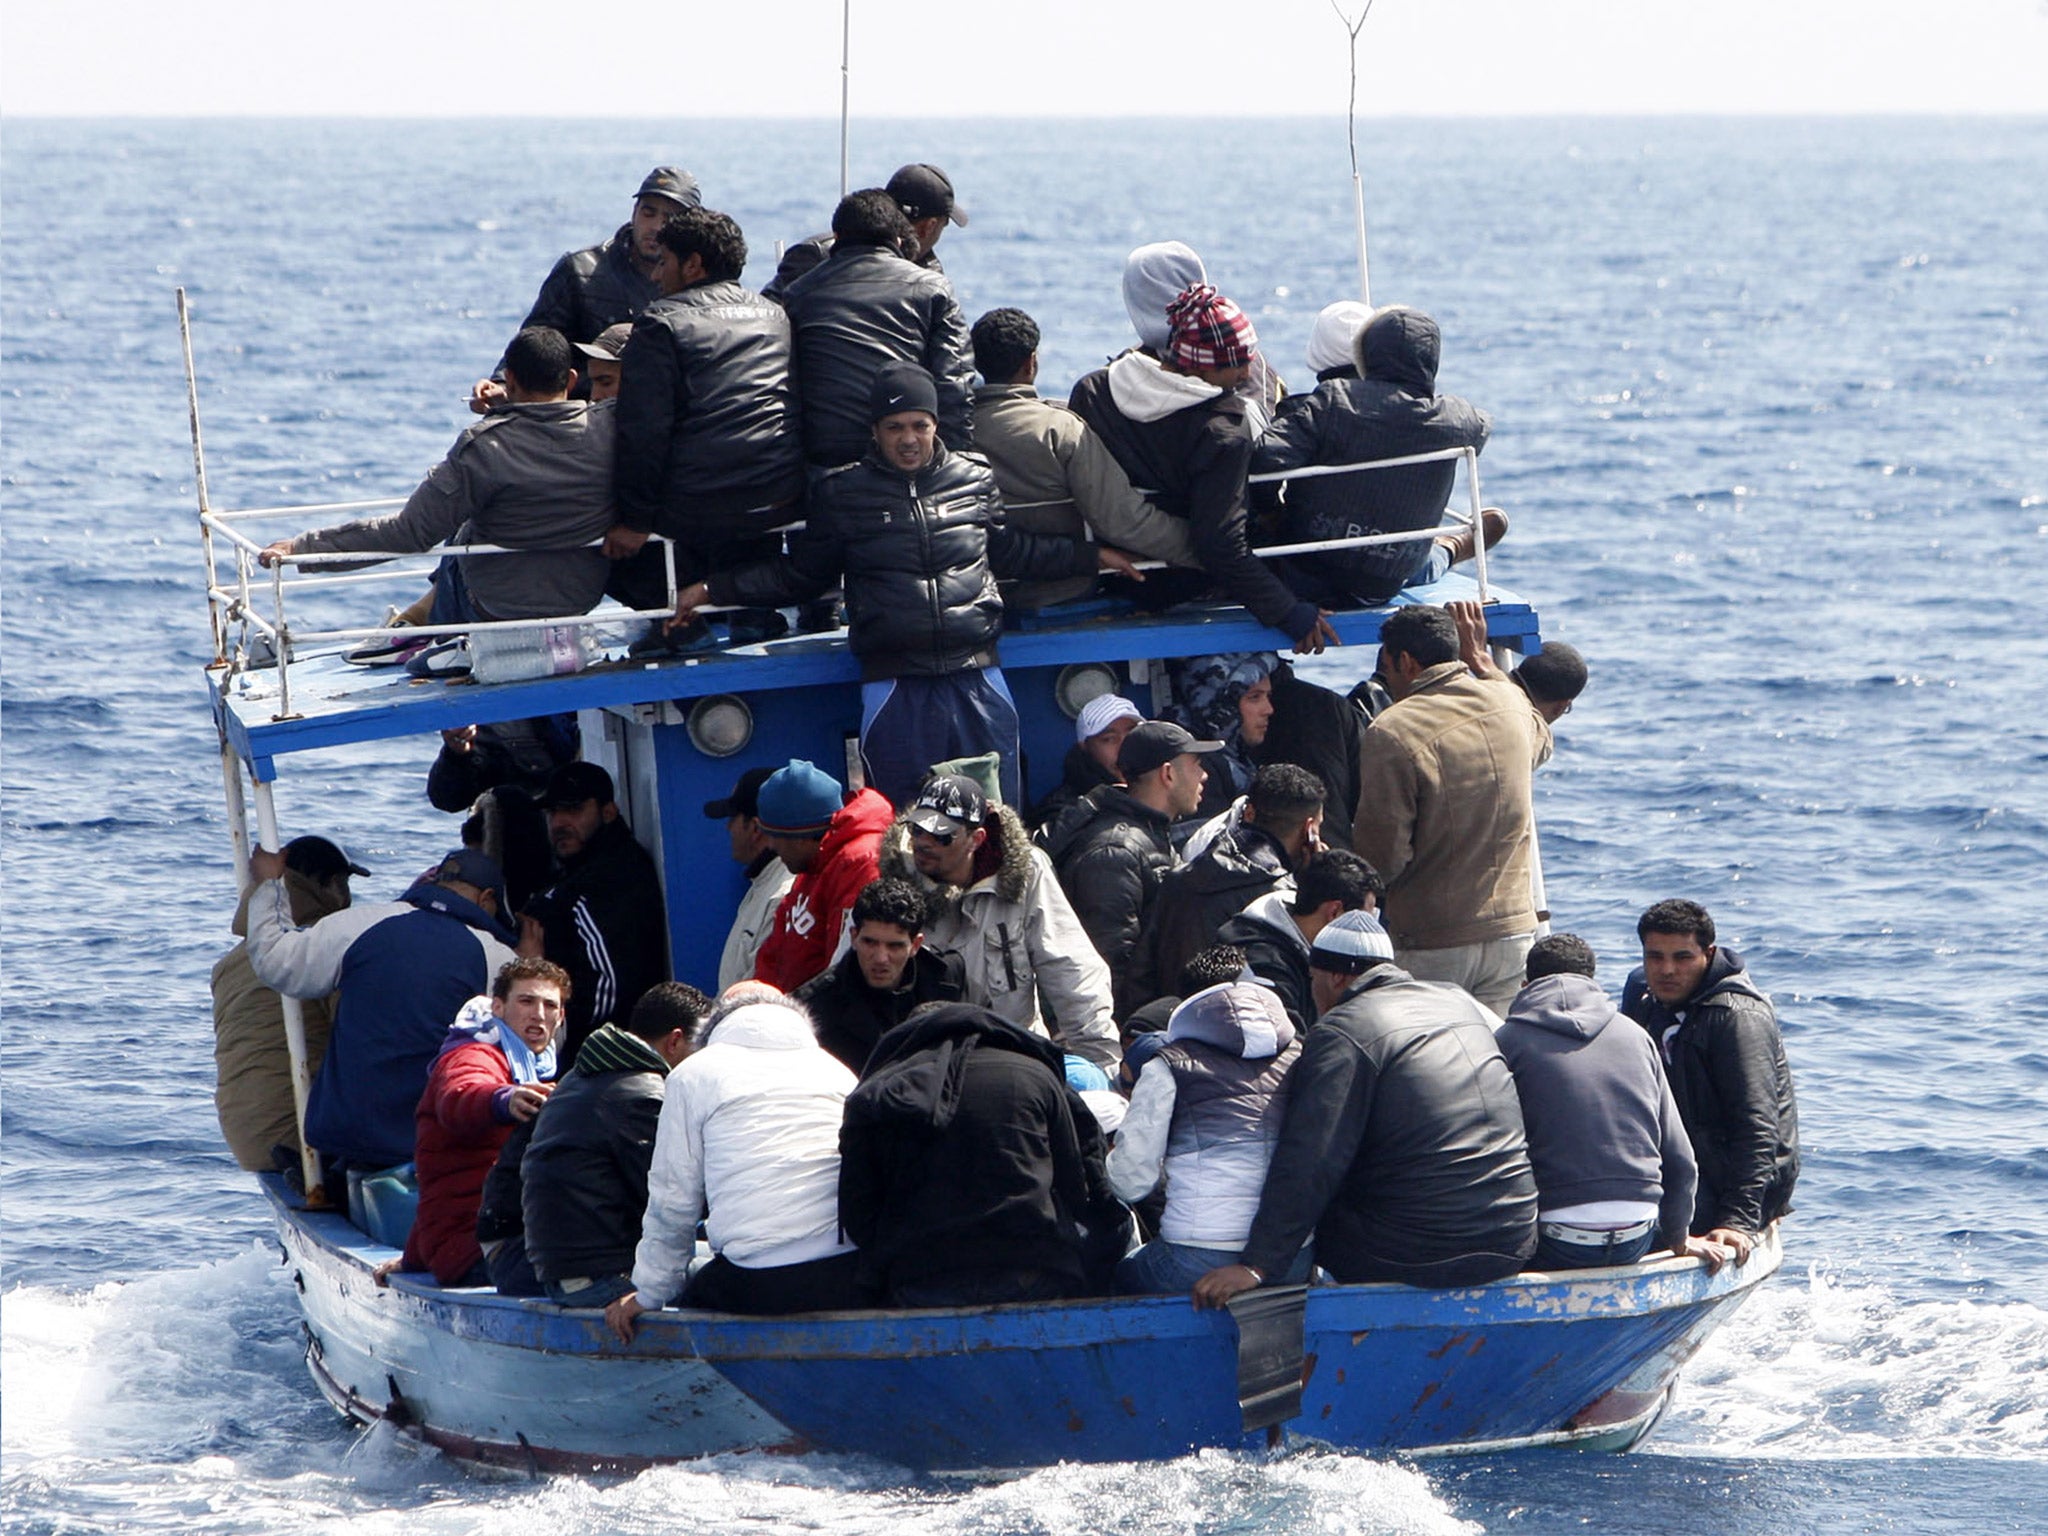 A boat of would-be immigrants near the Italian island of Lampedusa. Most of those crossing the Mediterranean headed to Italy